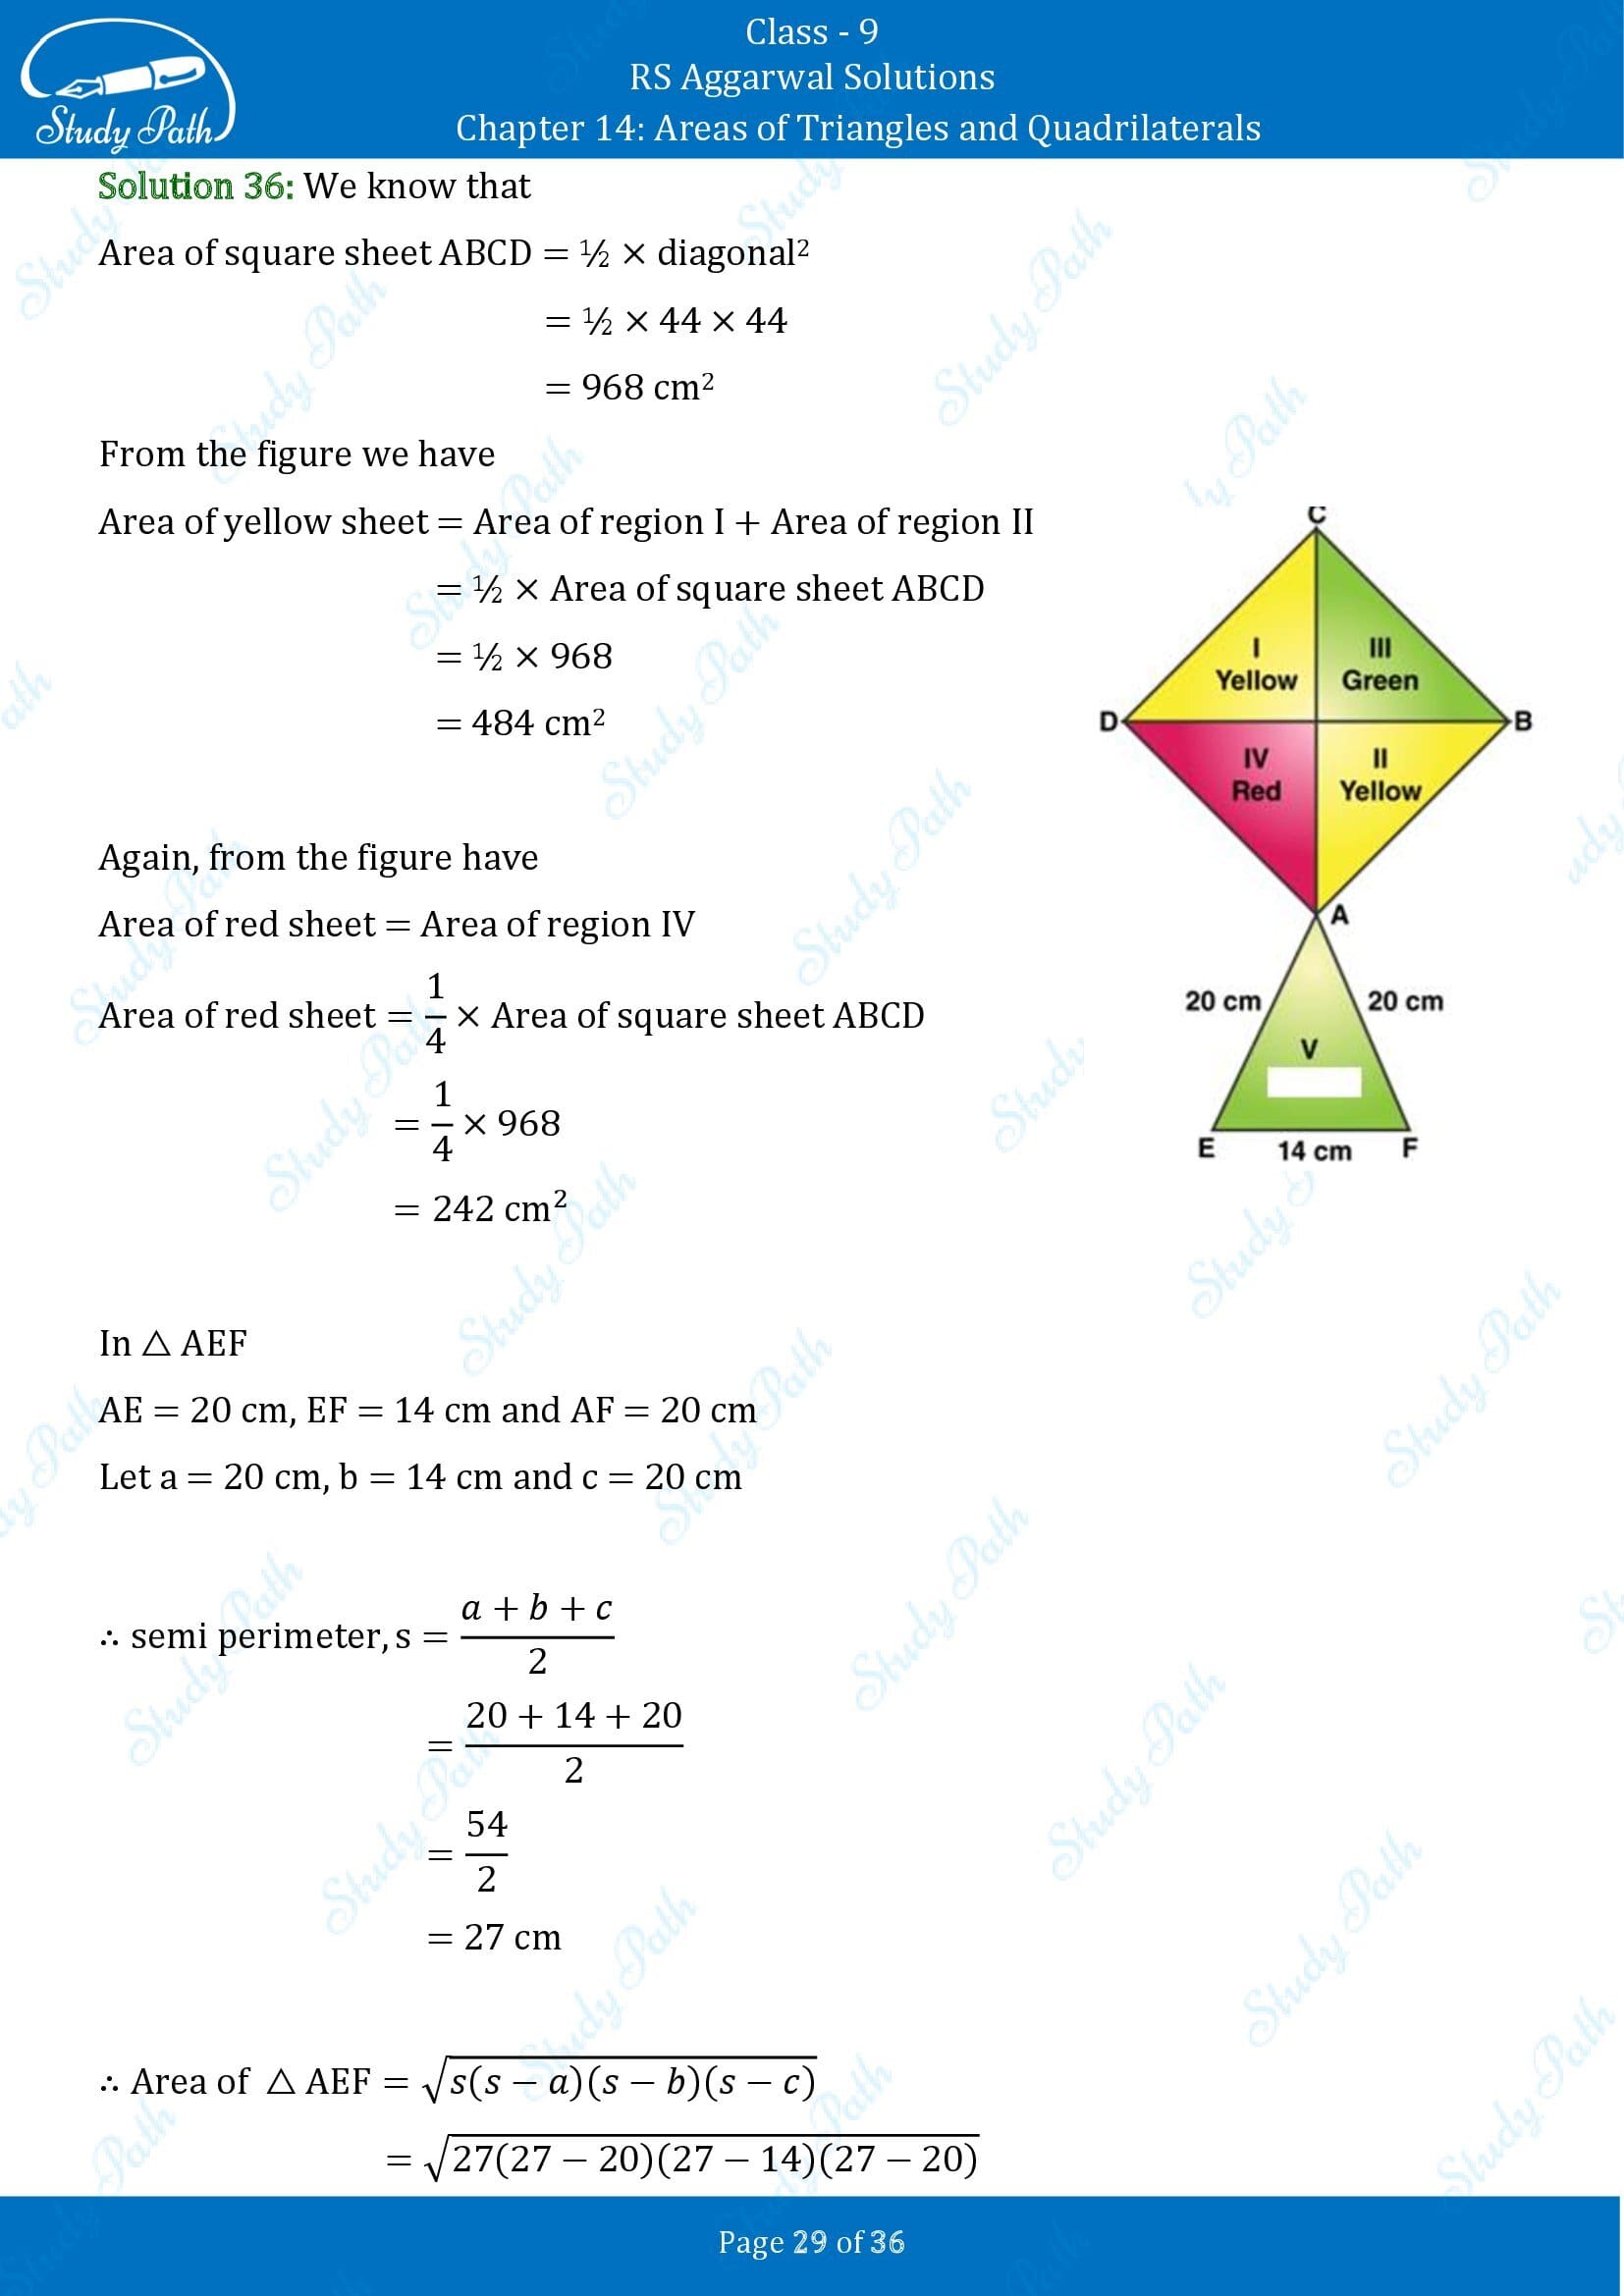 RS Aggarwal Solutions Class 9 Chapter 14 Areas of Triangles and Quadrilaterals Exercise 14 00029